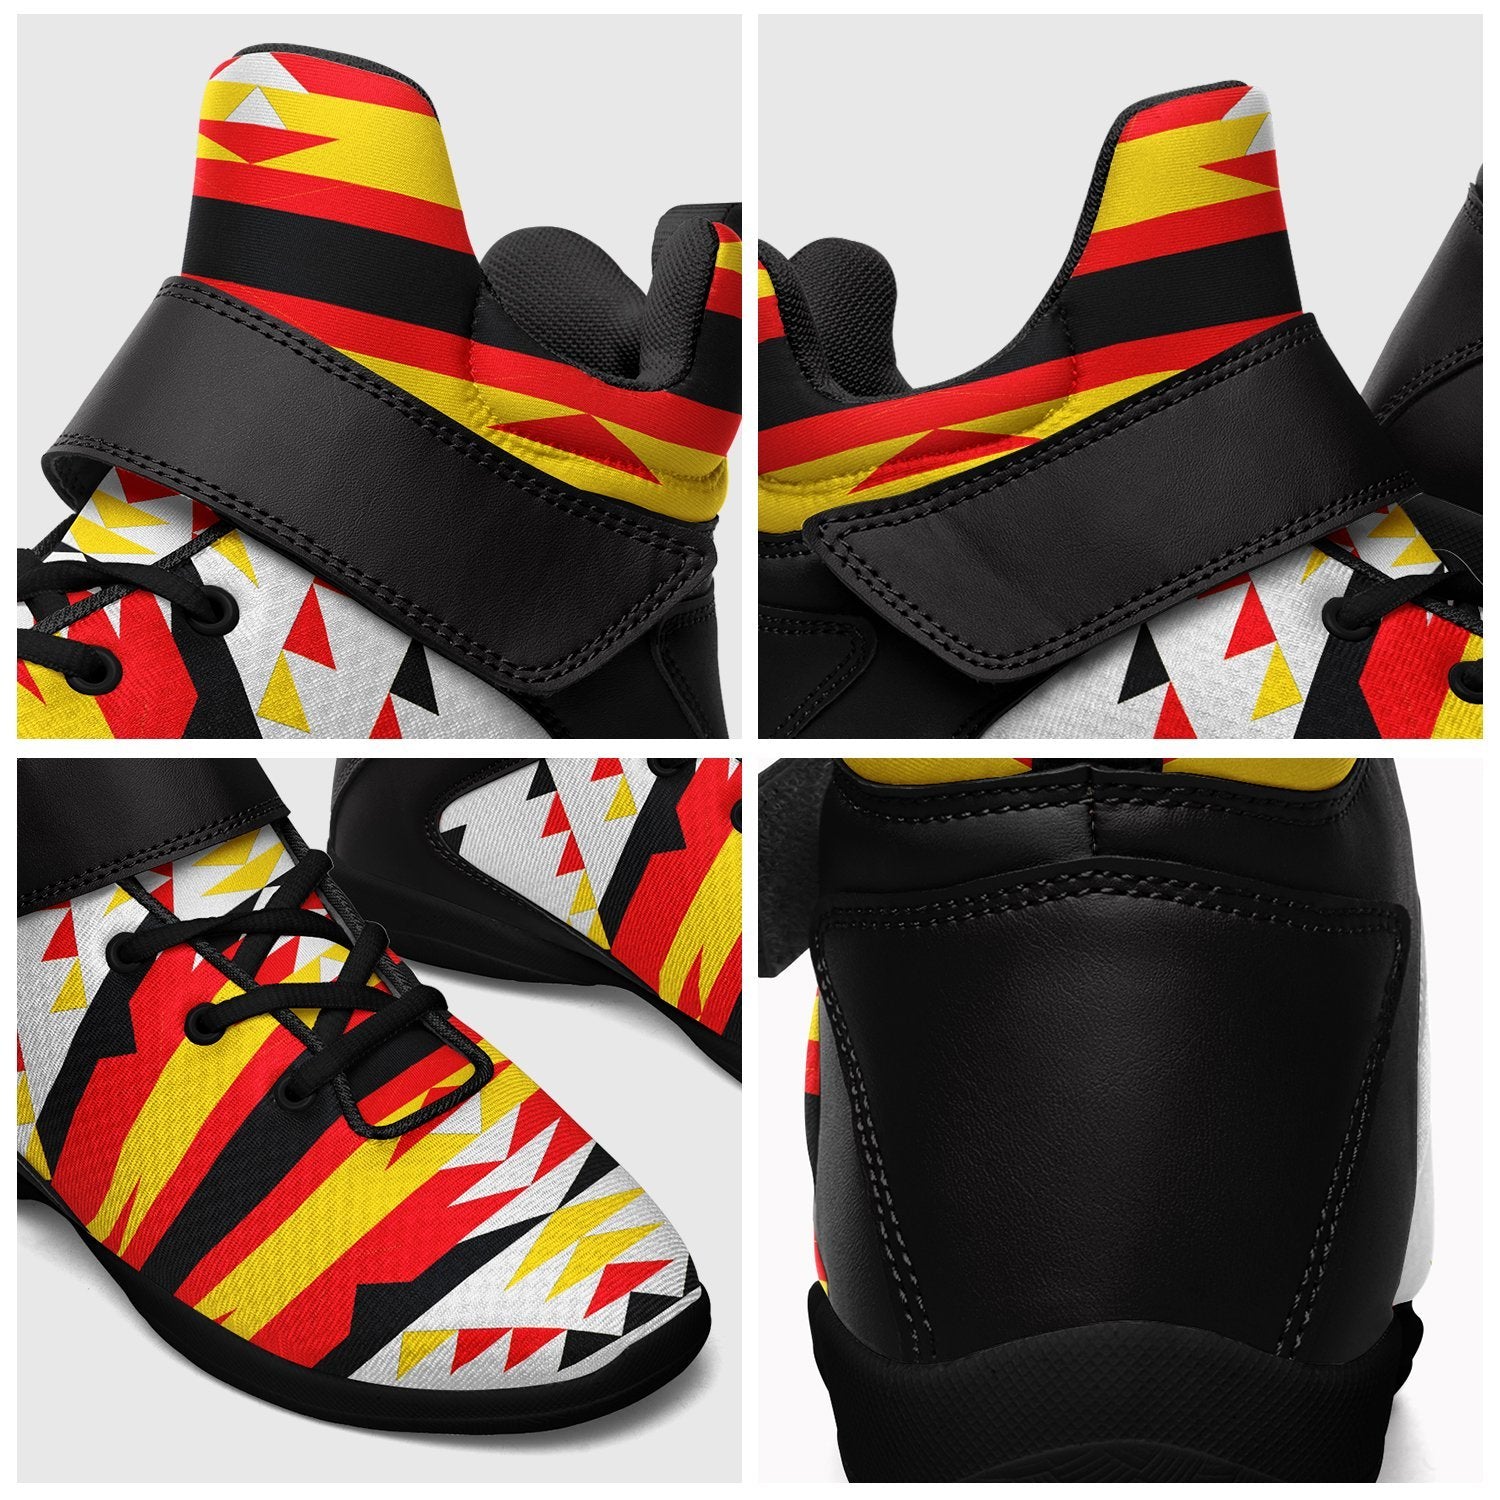 Visions of Peace Directions Ipottaa Basketball / Sport High Top Shoes 49 Dzine 